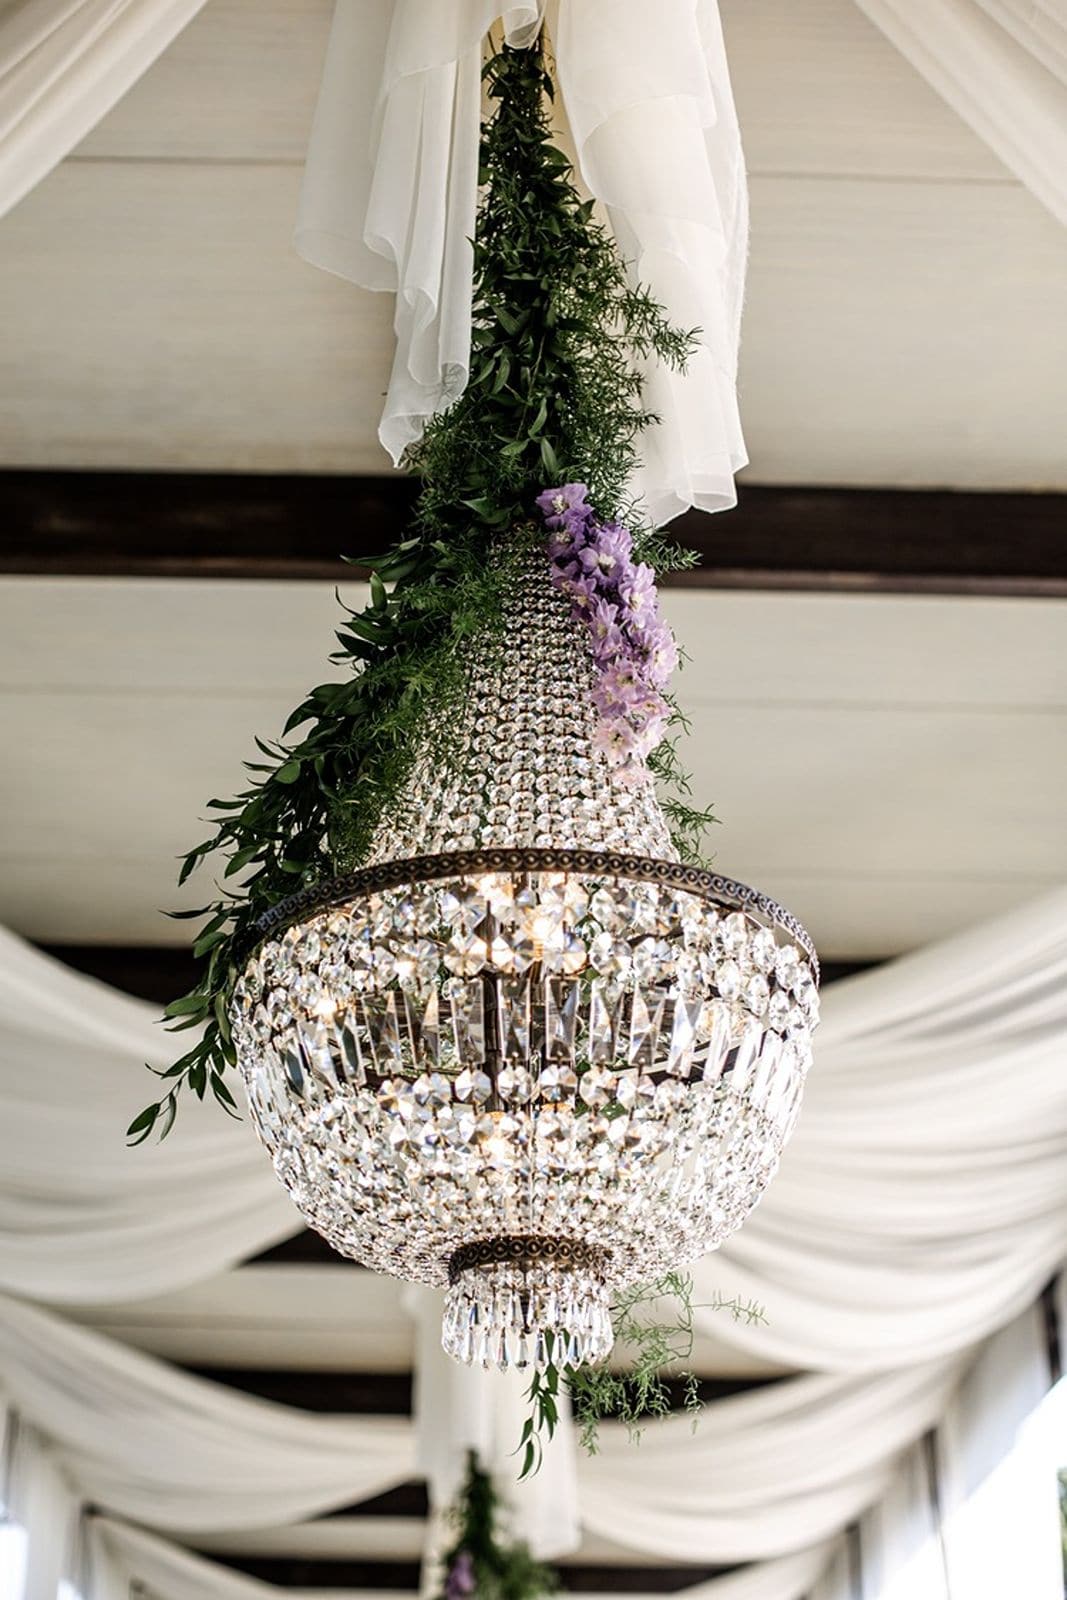 Chandelier hangs down from tented wedding ceremony setup